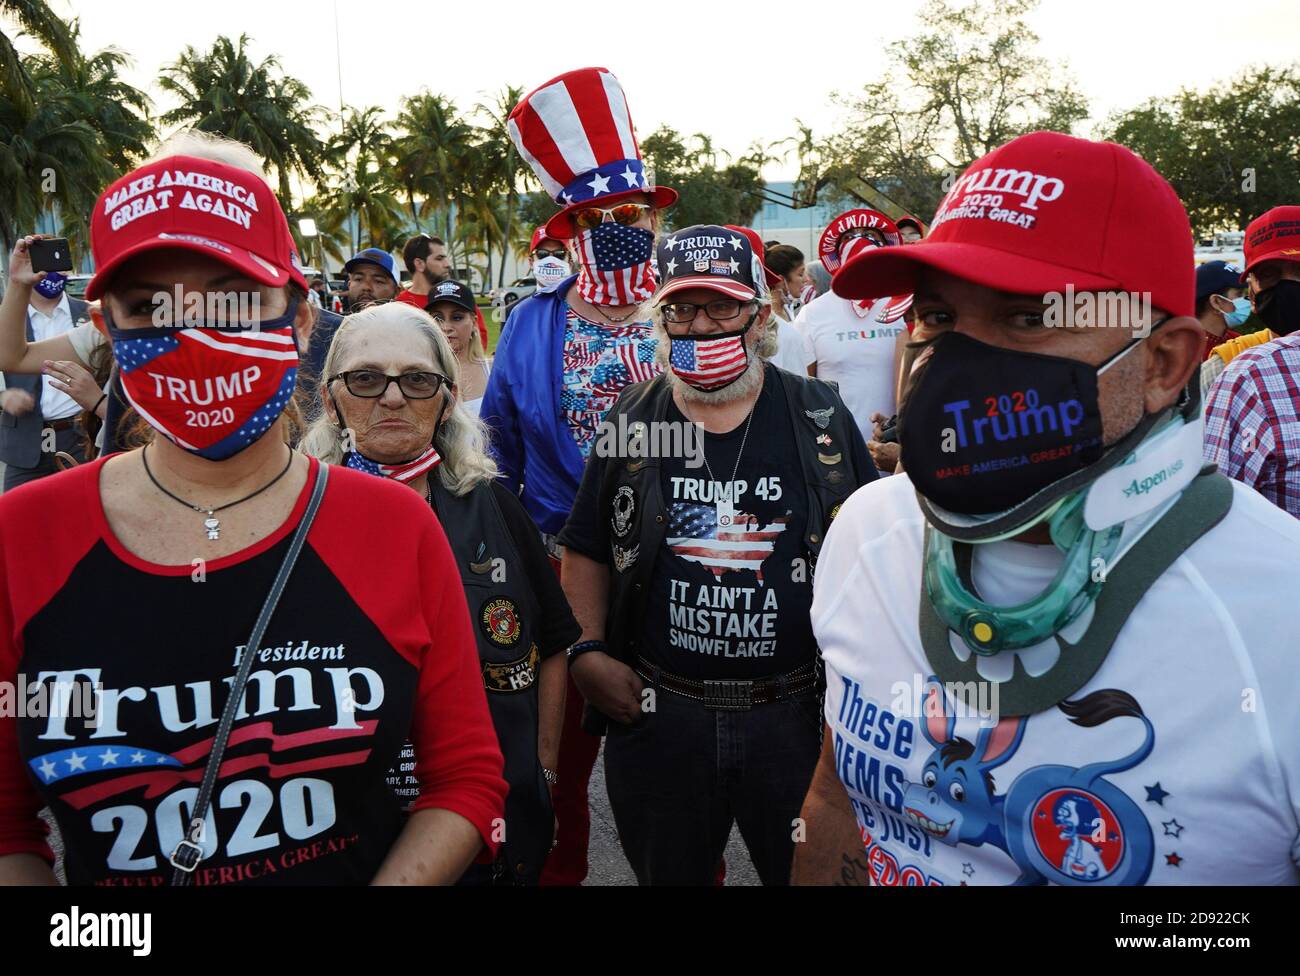 Opa Locka, United States. 01st Nov, 2020. November 1, 2020 - Opa-Locka, Florida, United States - People wait in line to hear U.S. President Donald Trump speak at a campaign rally at Miami-Opa Locka Executive Airport on November 1, 2020 in Opa-Locka, Florida. President Trump held events in five states today, as he continues his campaign against Democratic presidential nominee Joe Biden two days before the November 3 election. Credit: Paul Hennessy/Alamy Live News Stock Photo